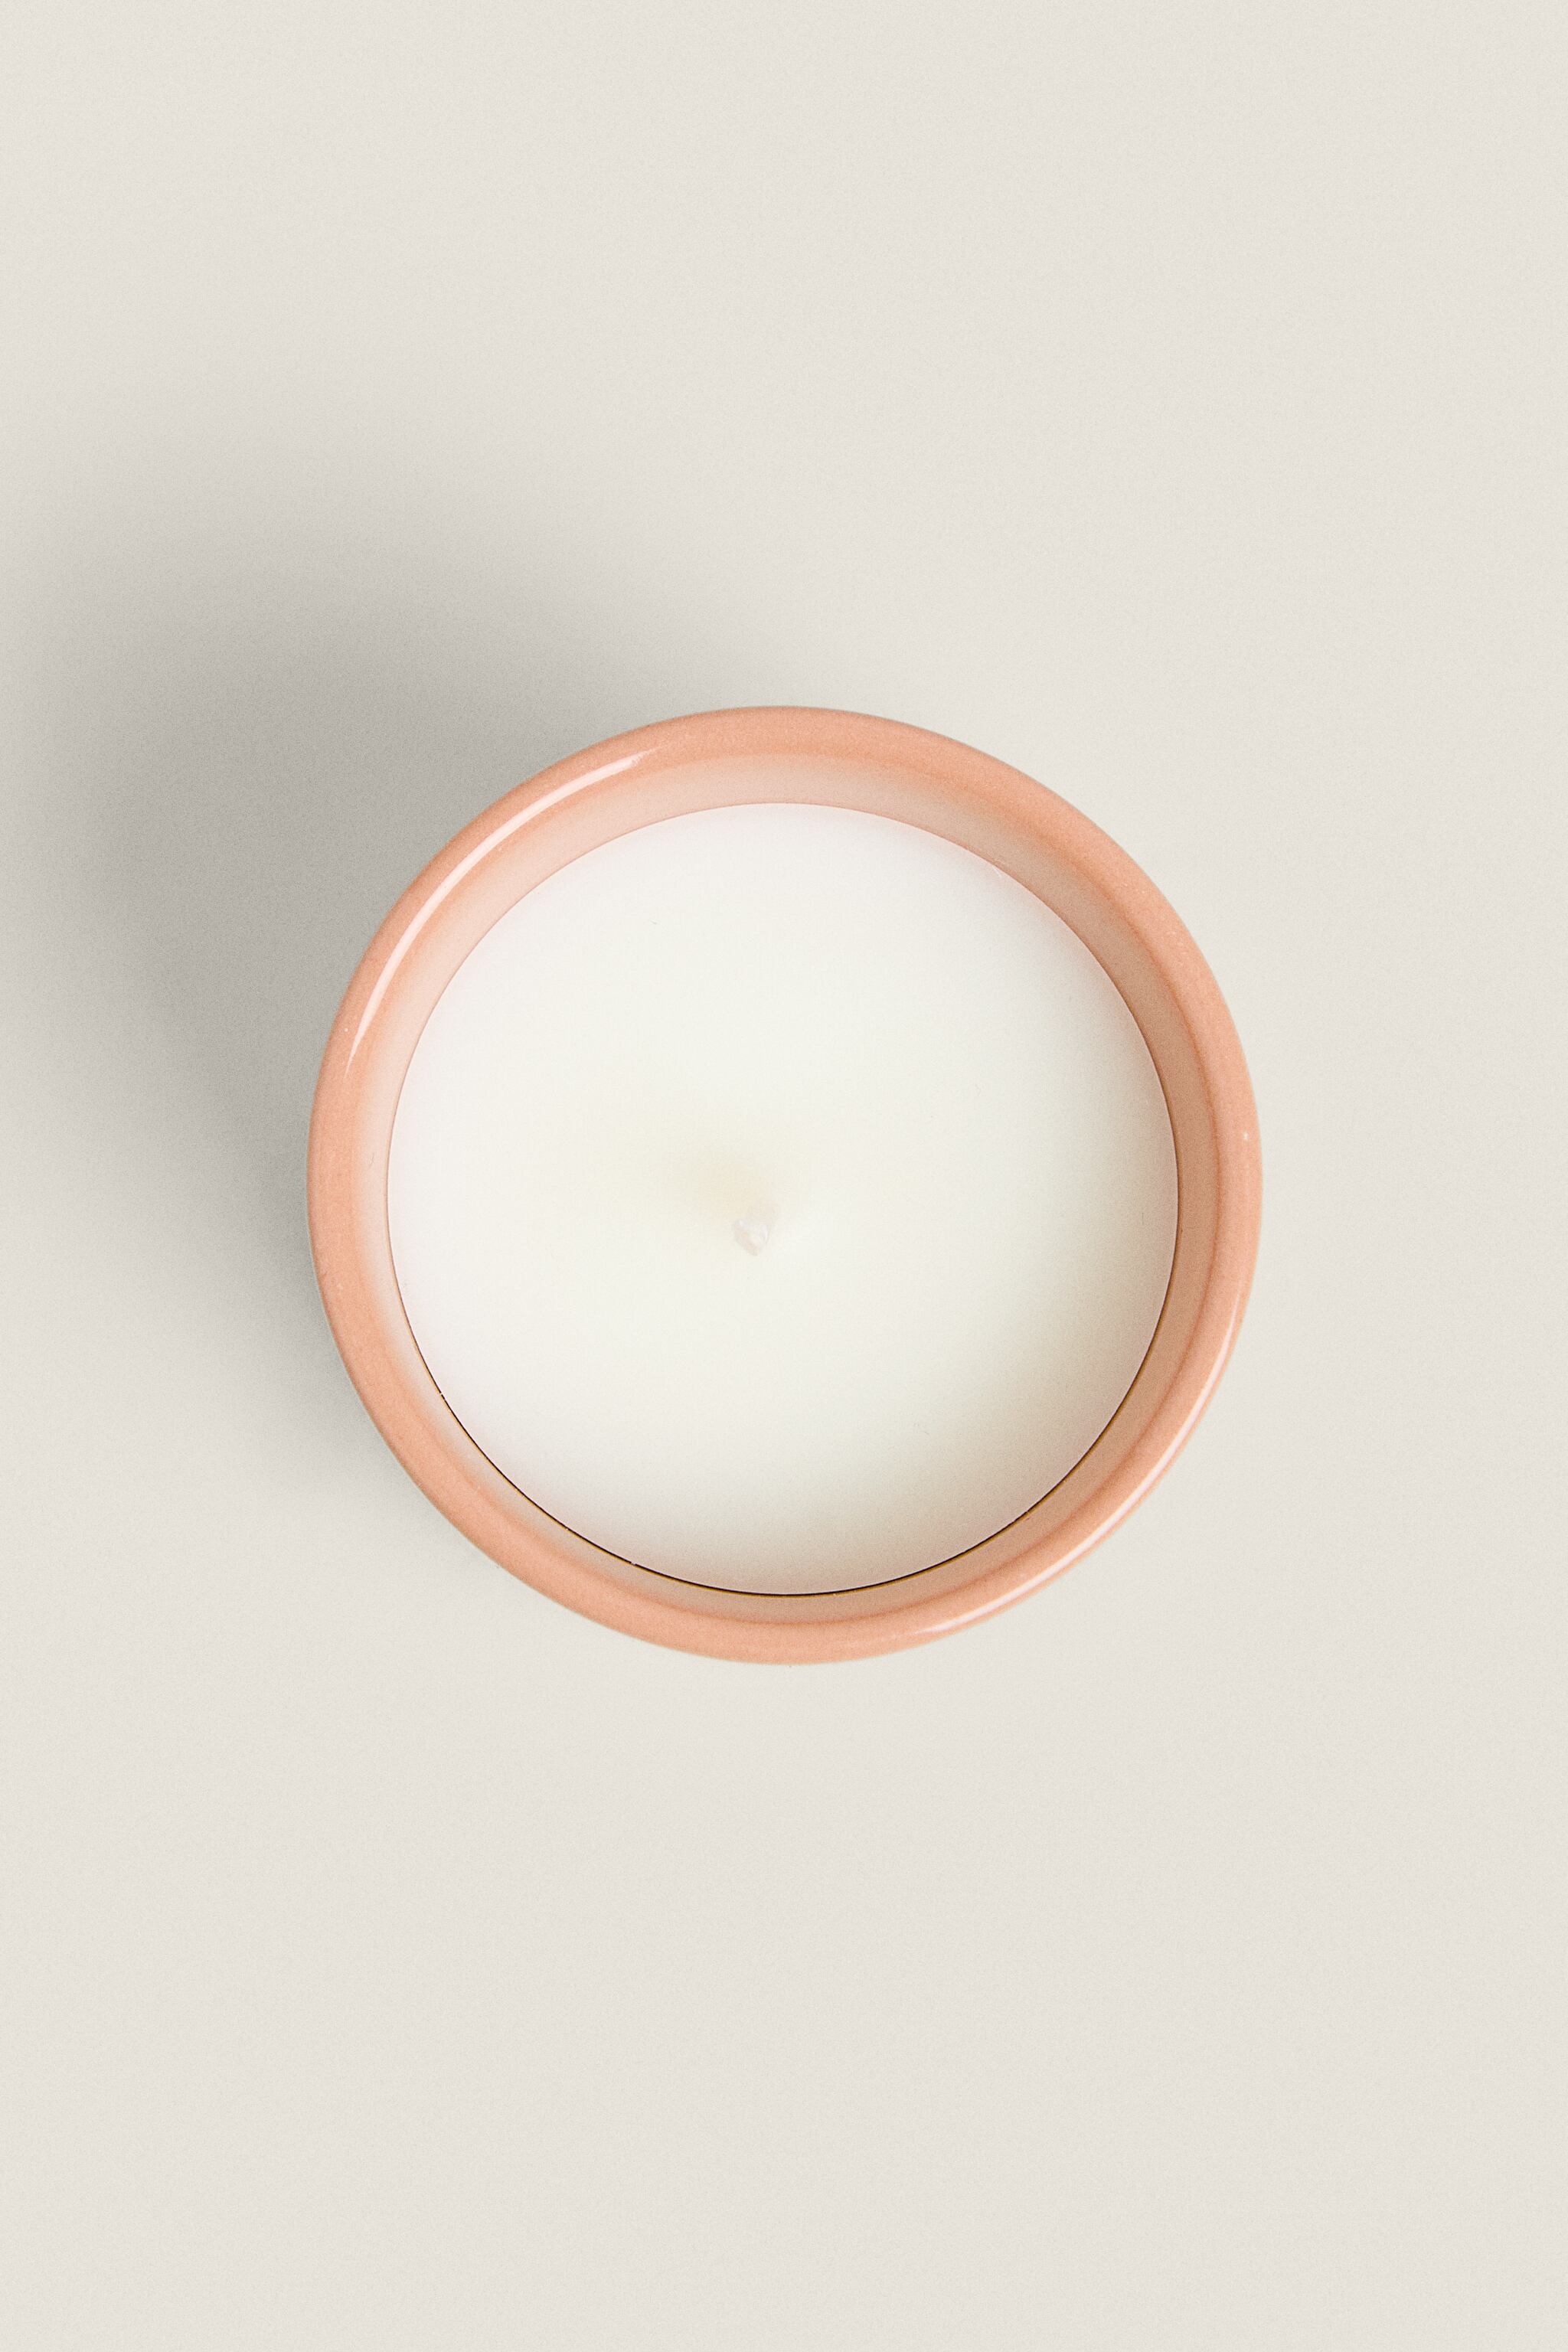 G) FLORAL BEYOND SCENTED CANDLE